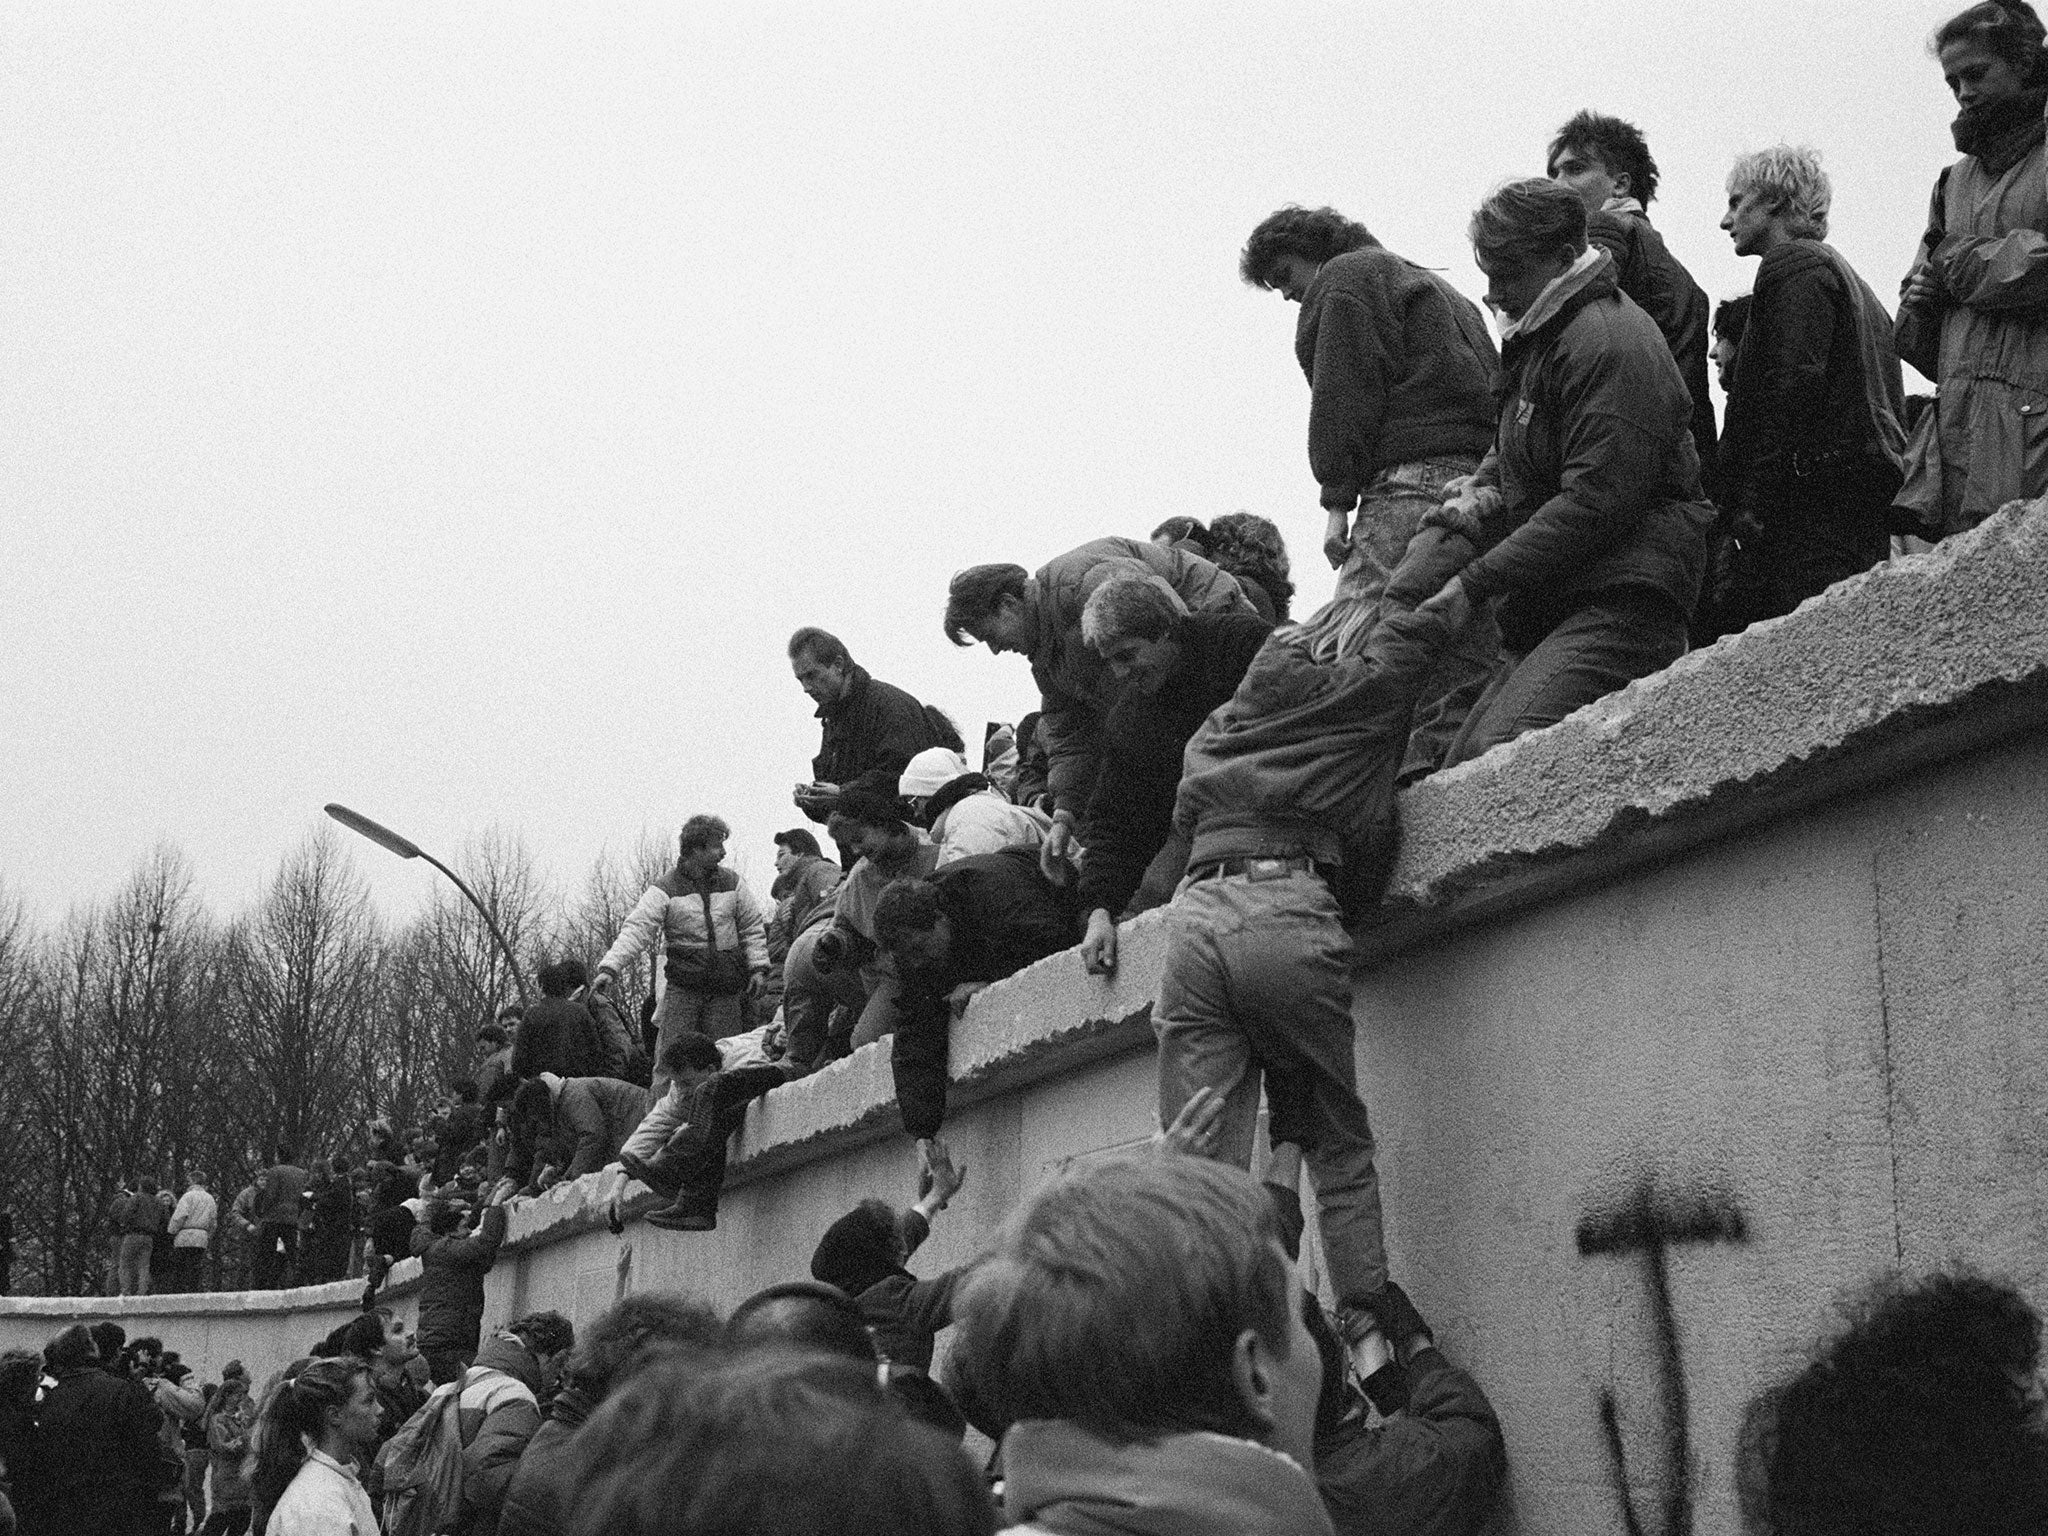 East Berliners climb onto the Berlin Wall to celebrate the effective end of the city's partition on 31st December 1989